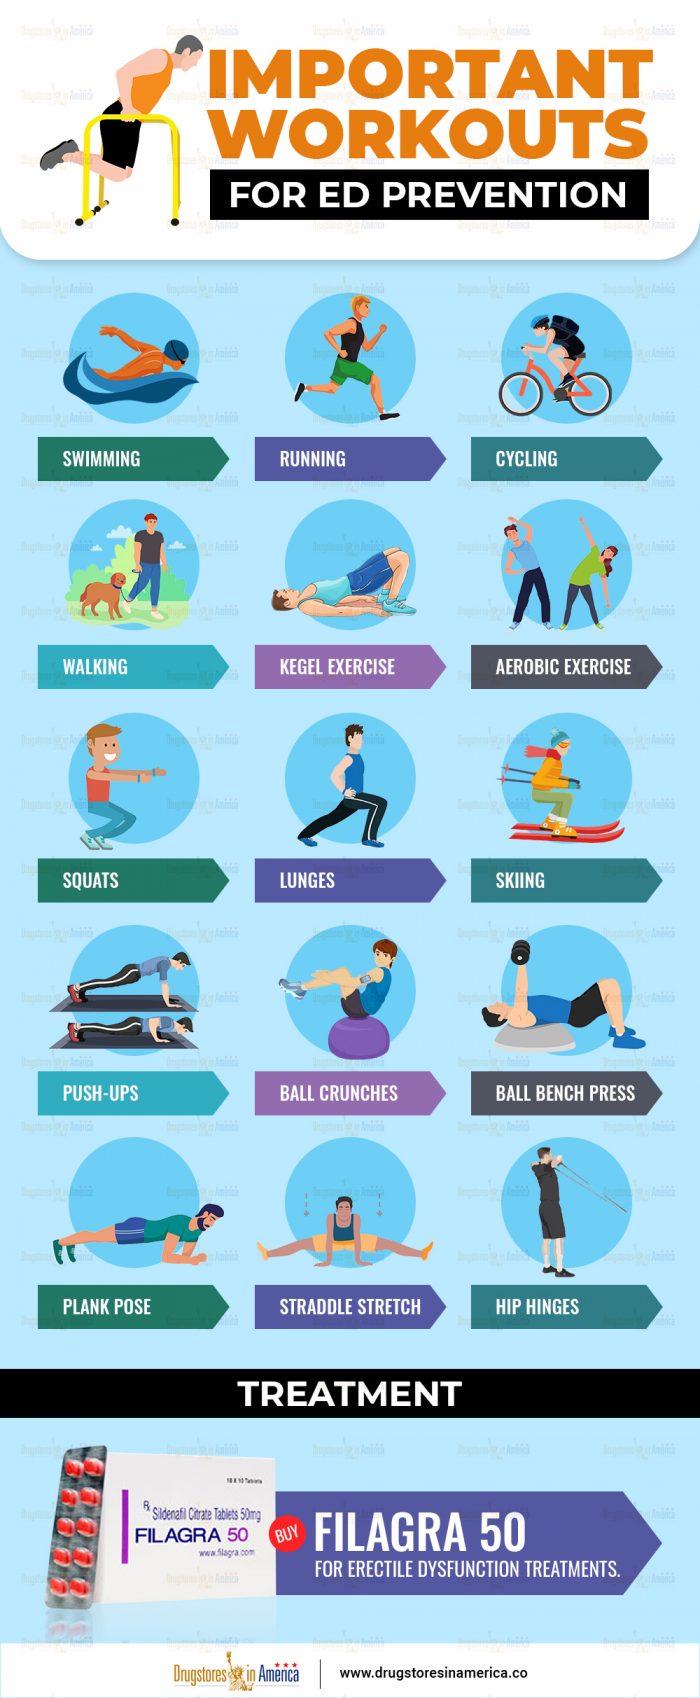 Important Workouts for ED Prevention